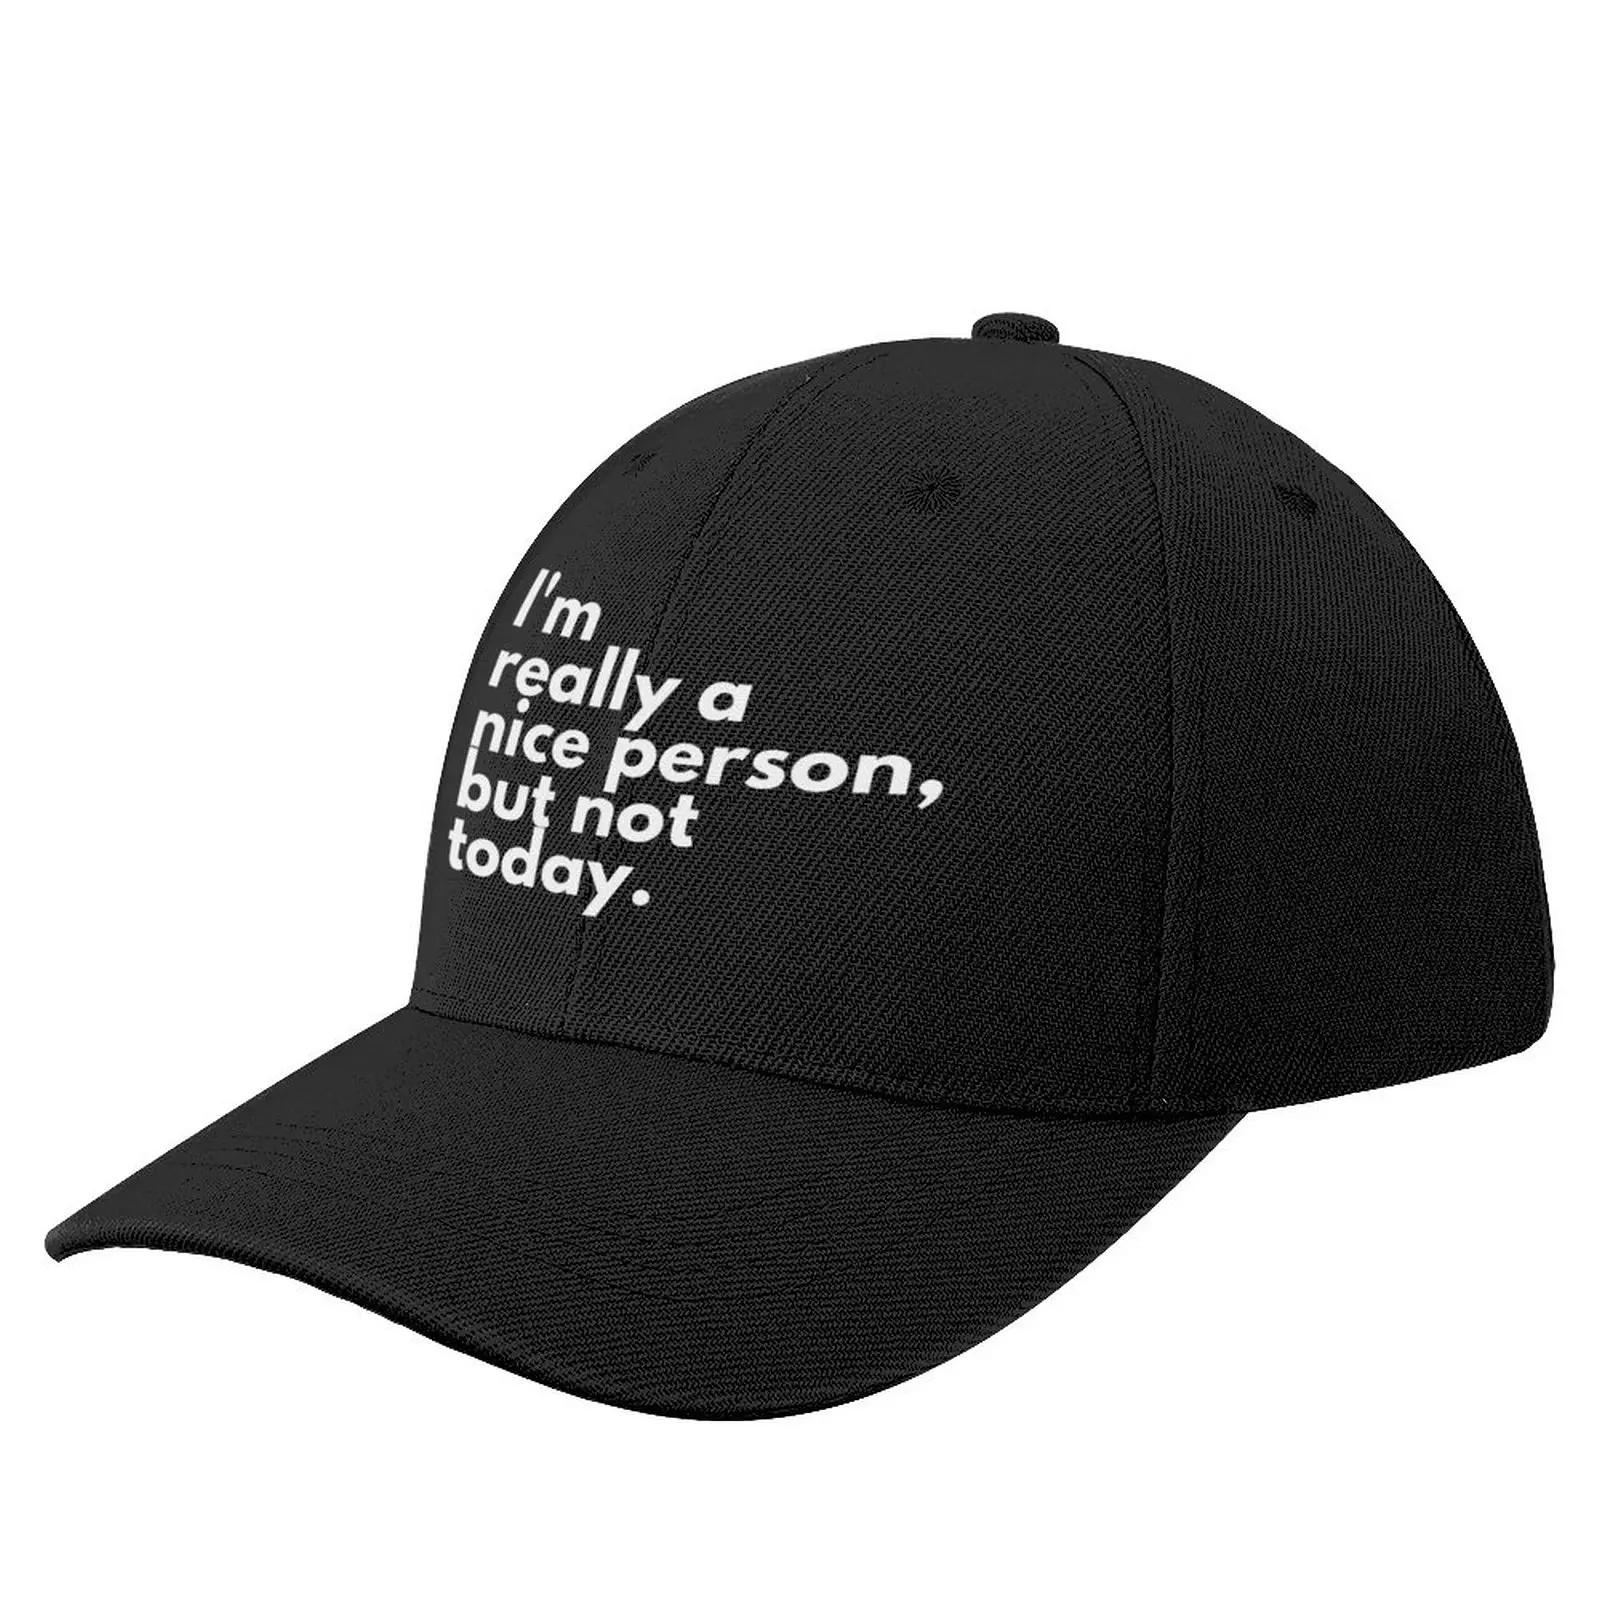 

I'm really a nice person, but not today. Baseball Cap Visor New In Hat Brand Man Caps Mens Tennis Women'S